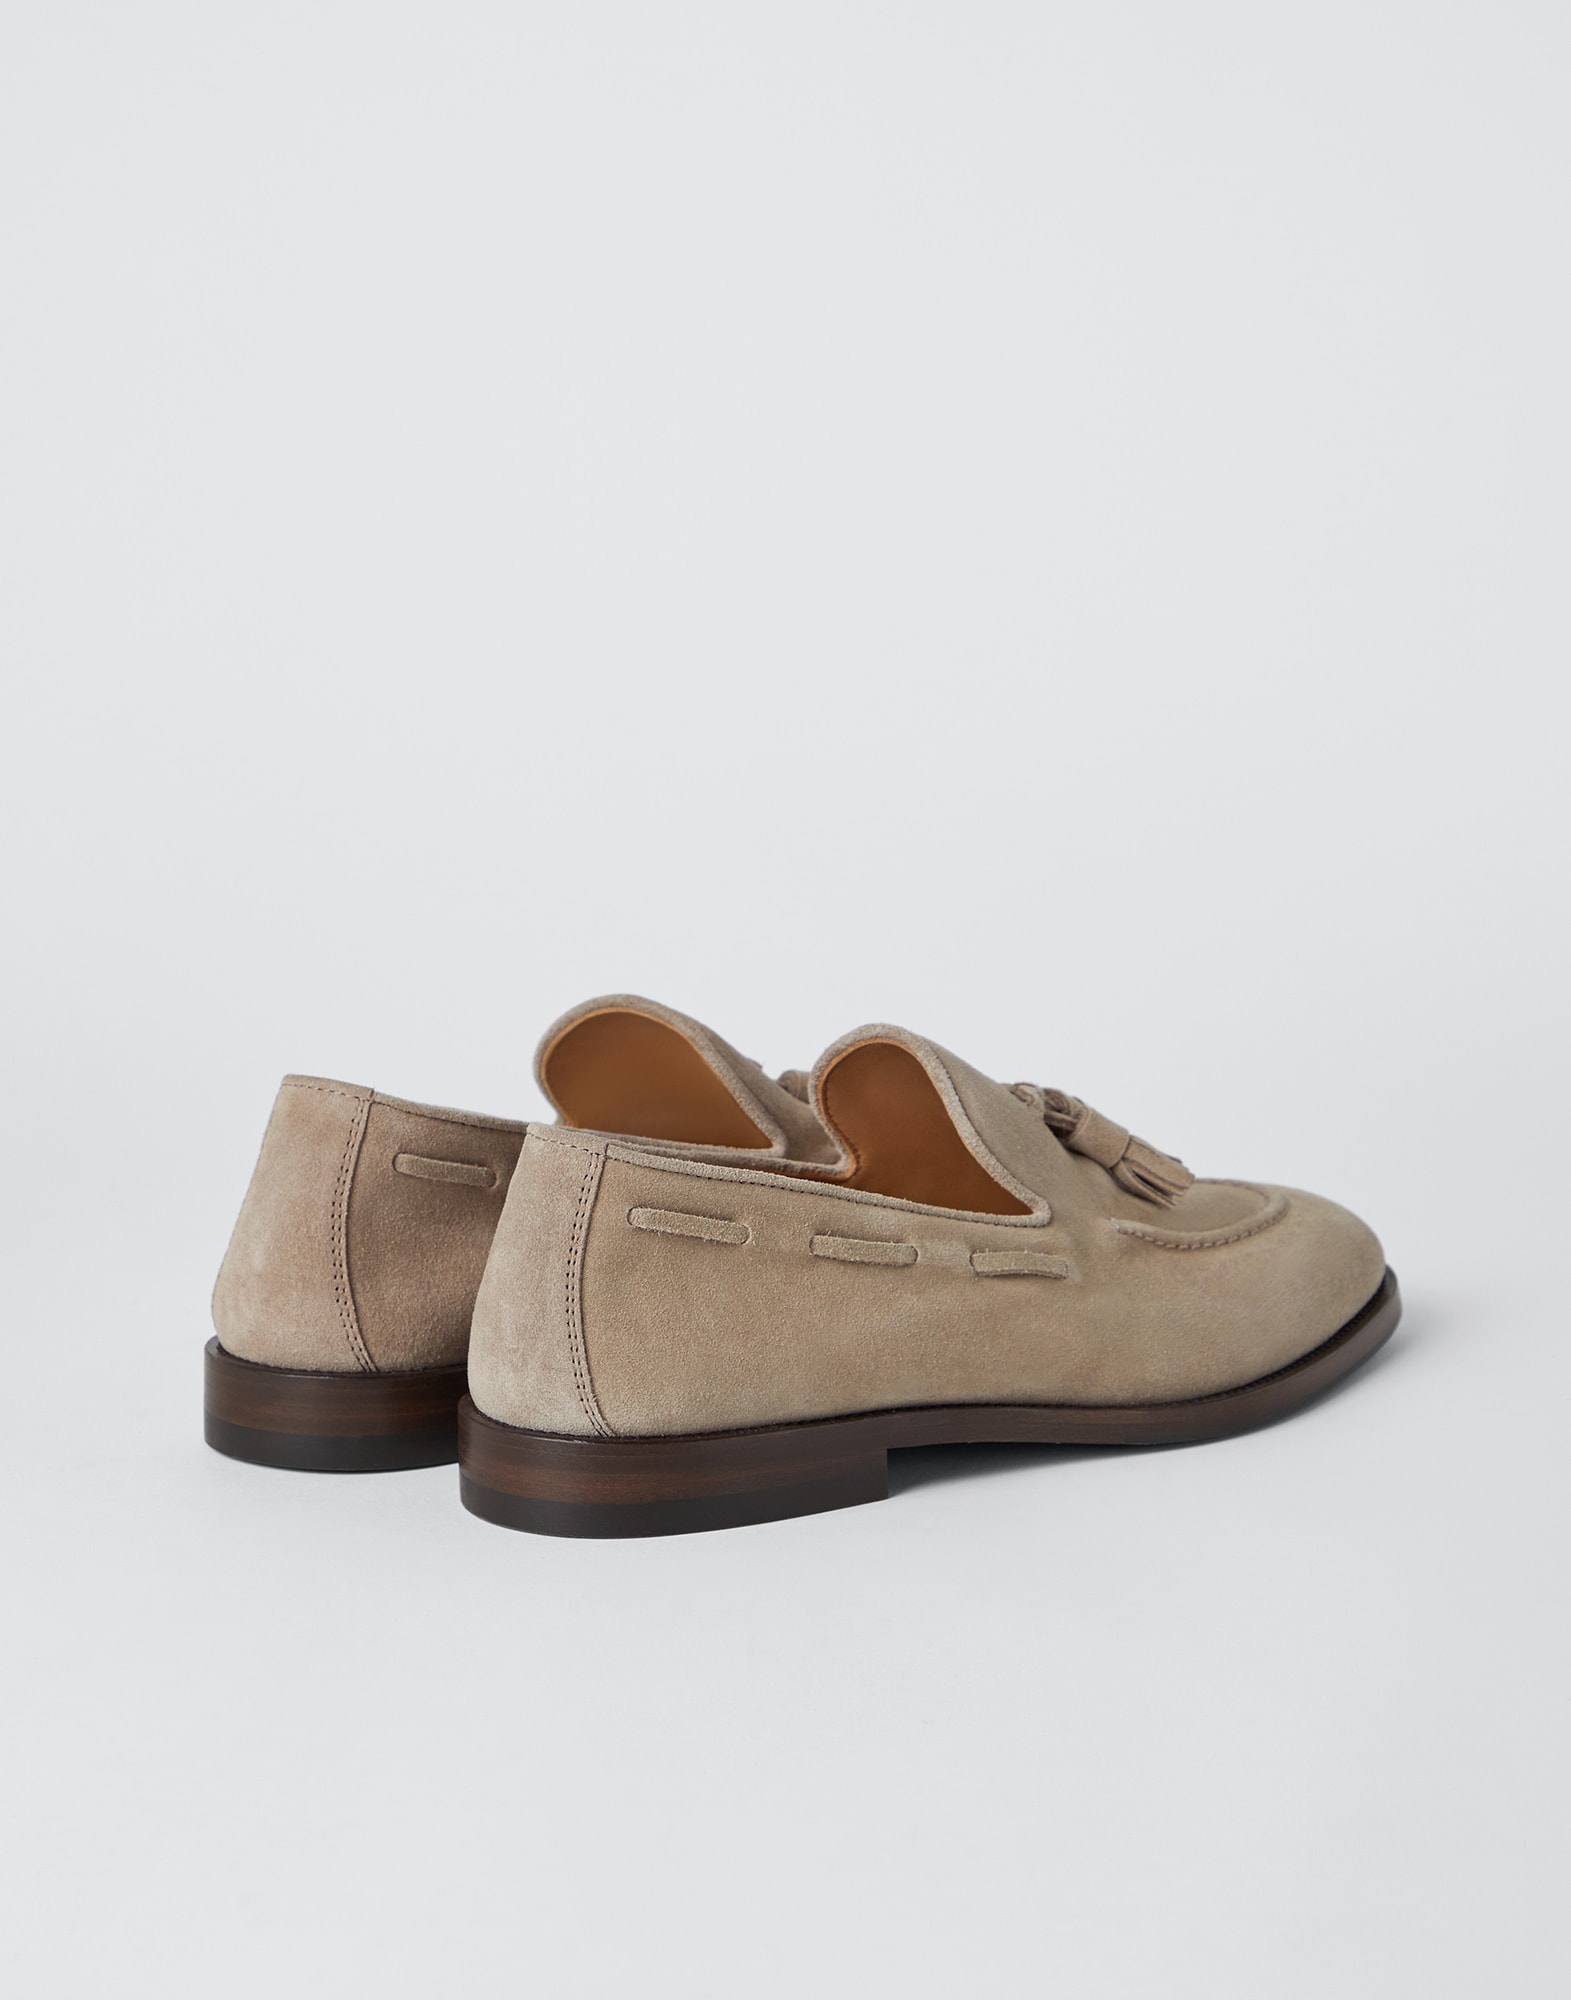 Suede loafers (241MZUCCLB703) for Man | Brunello Cucinelli